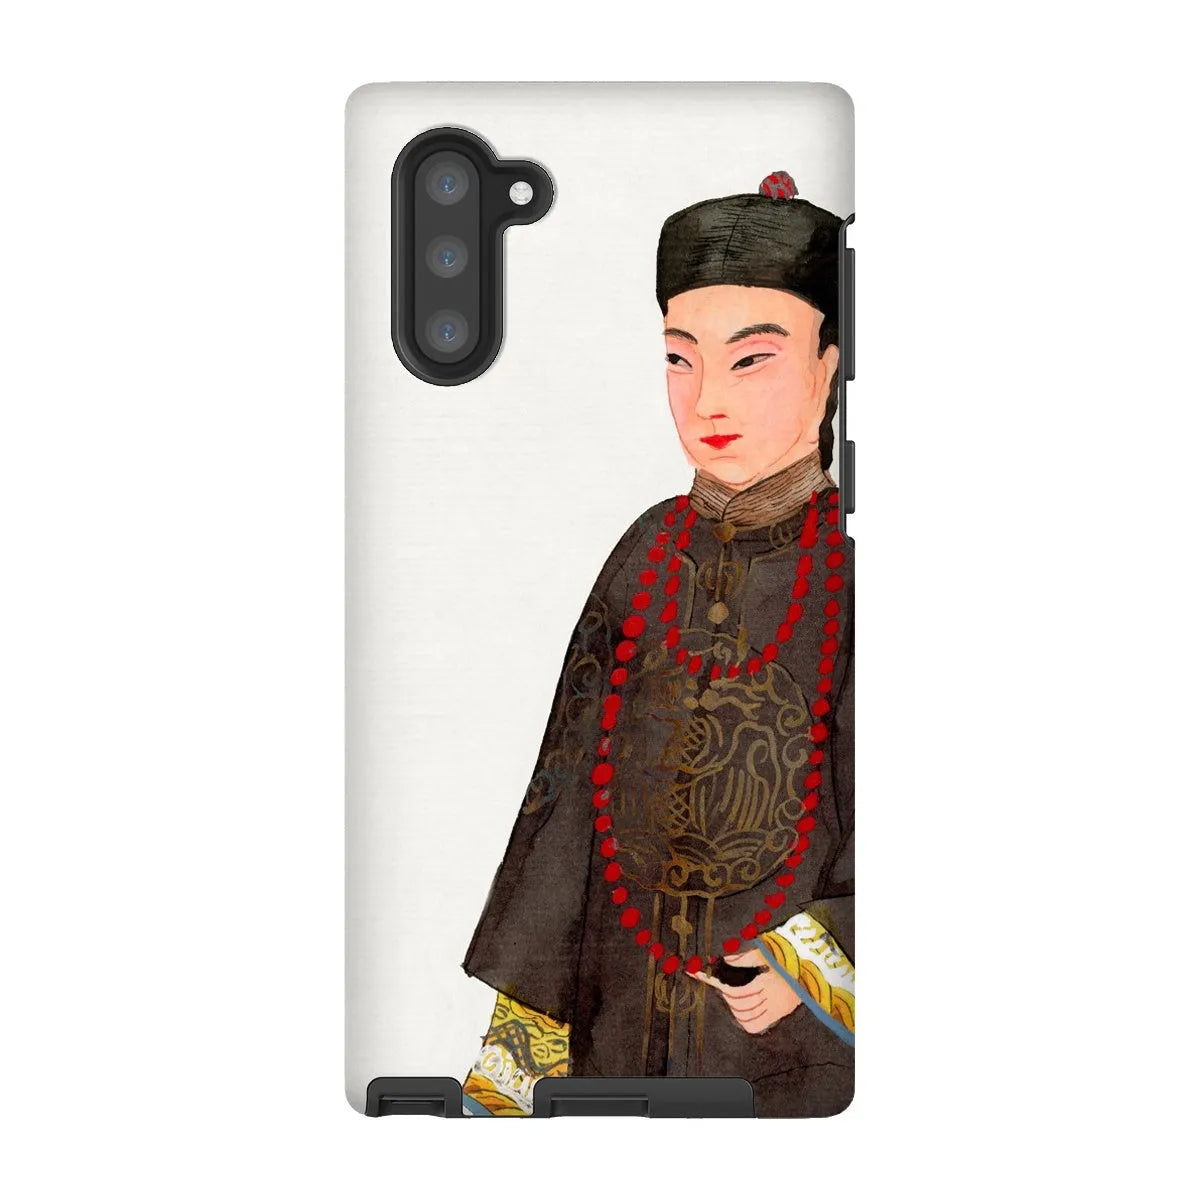 Emperor’s Courtier - Chinese Manchu Aesthetic Art Phone Case - Samsung Galaxy Note 10 / Matte - Mobile Phone Cases